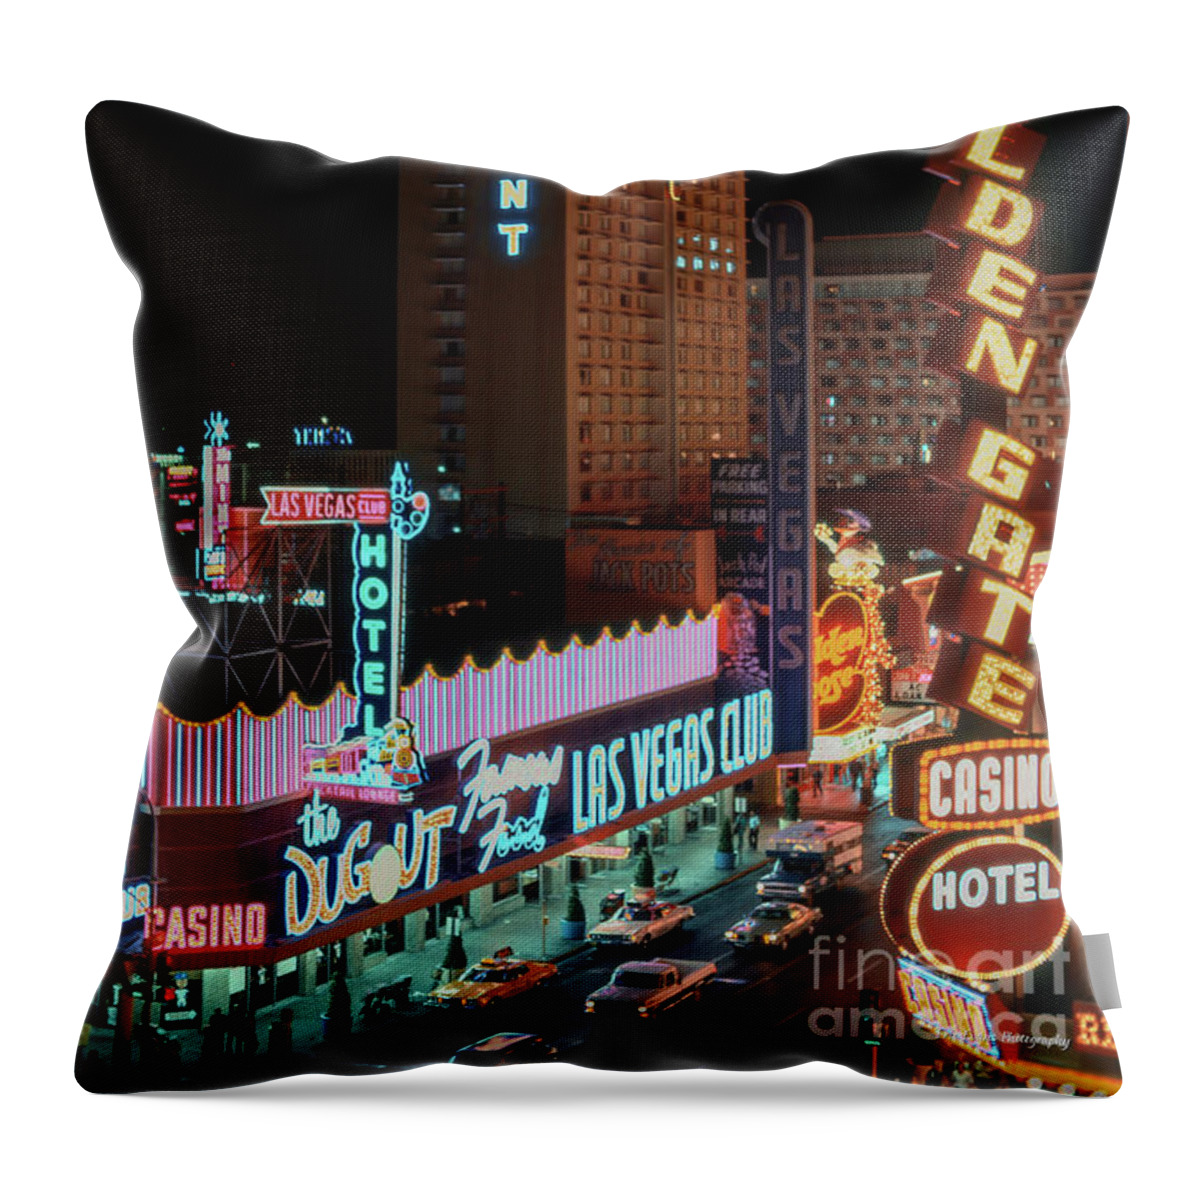 Las Vegas Club Throw Pillow featuring the photograph Fremont Street Las Vegas Club The Mint Night Elevated 1975 by Aloha Art